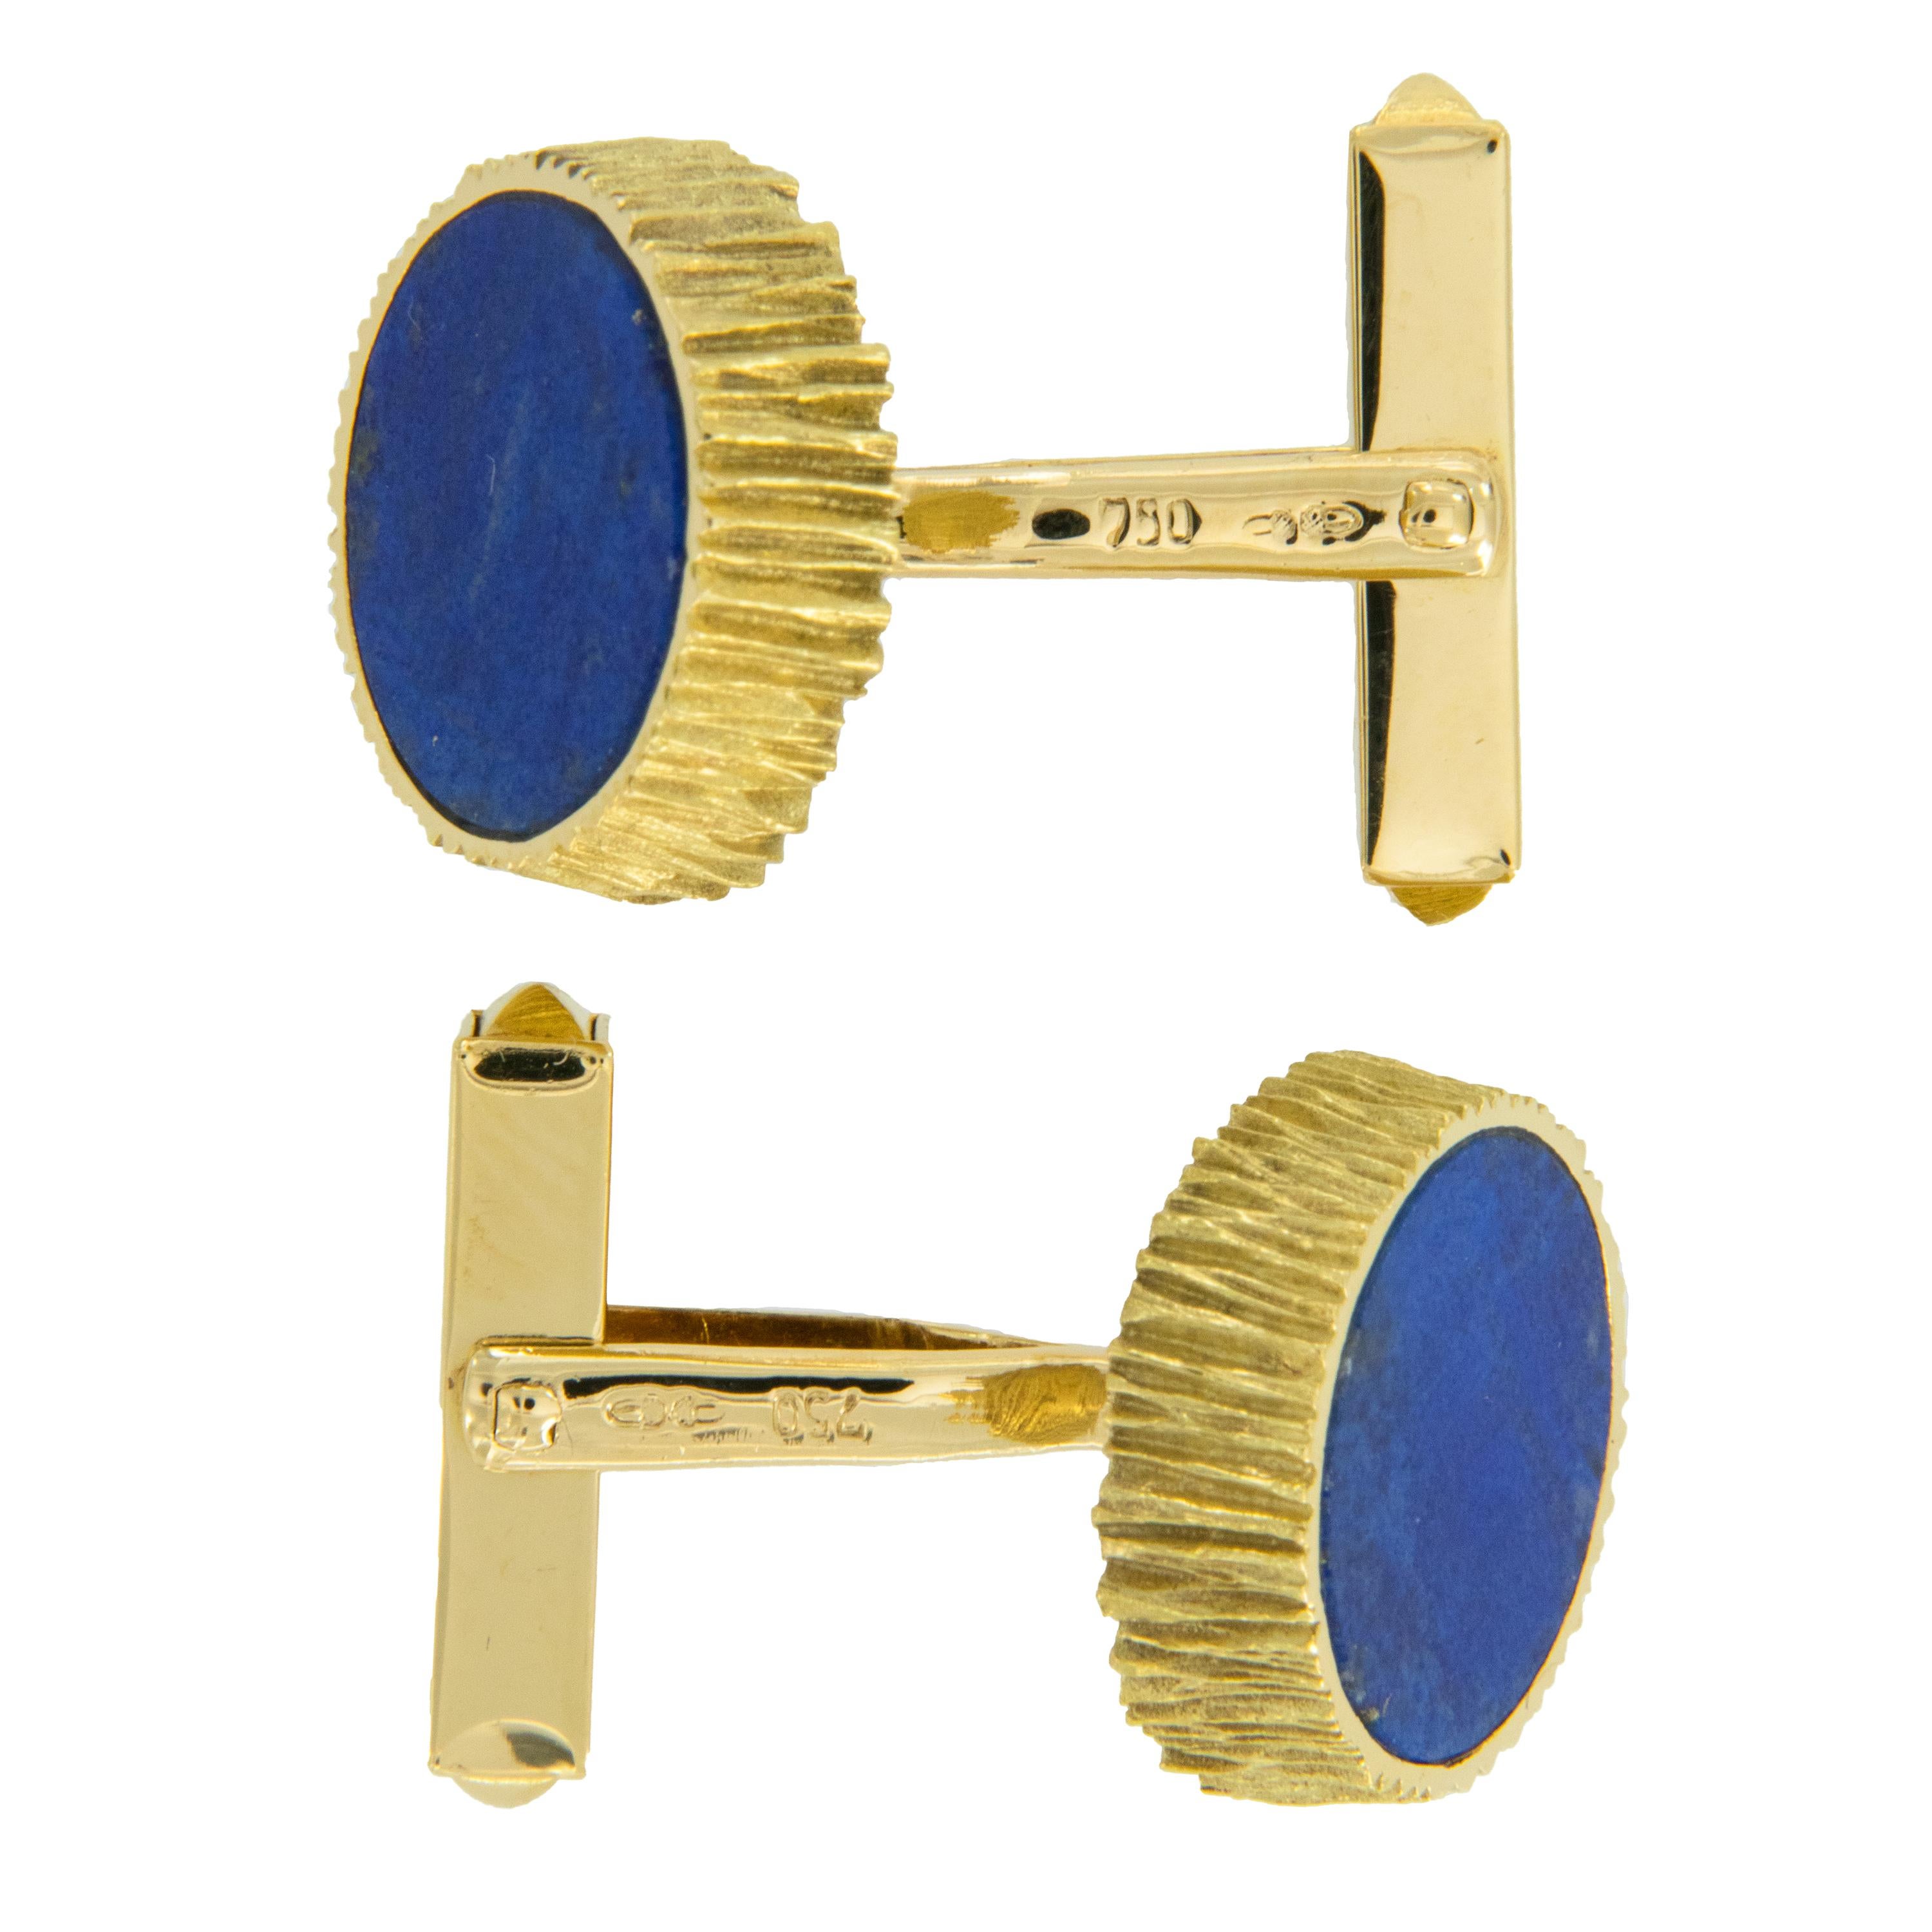 Used as a gemstone for over 6,500 years, lapis has long been a symbol of both royalty & honor. These fine blue lapis cufflinks will make you feel like a king while wearing them! Made from fine, rich 18 karat yellow gold with rippled texture &